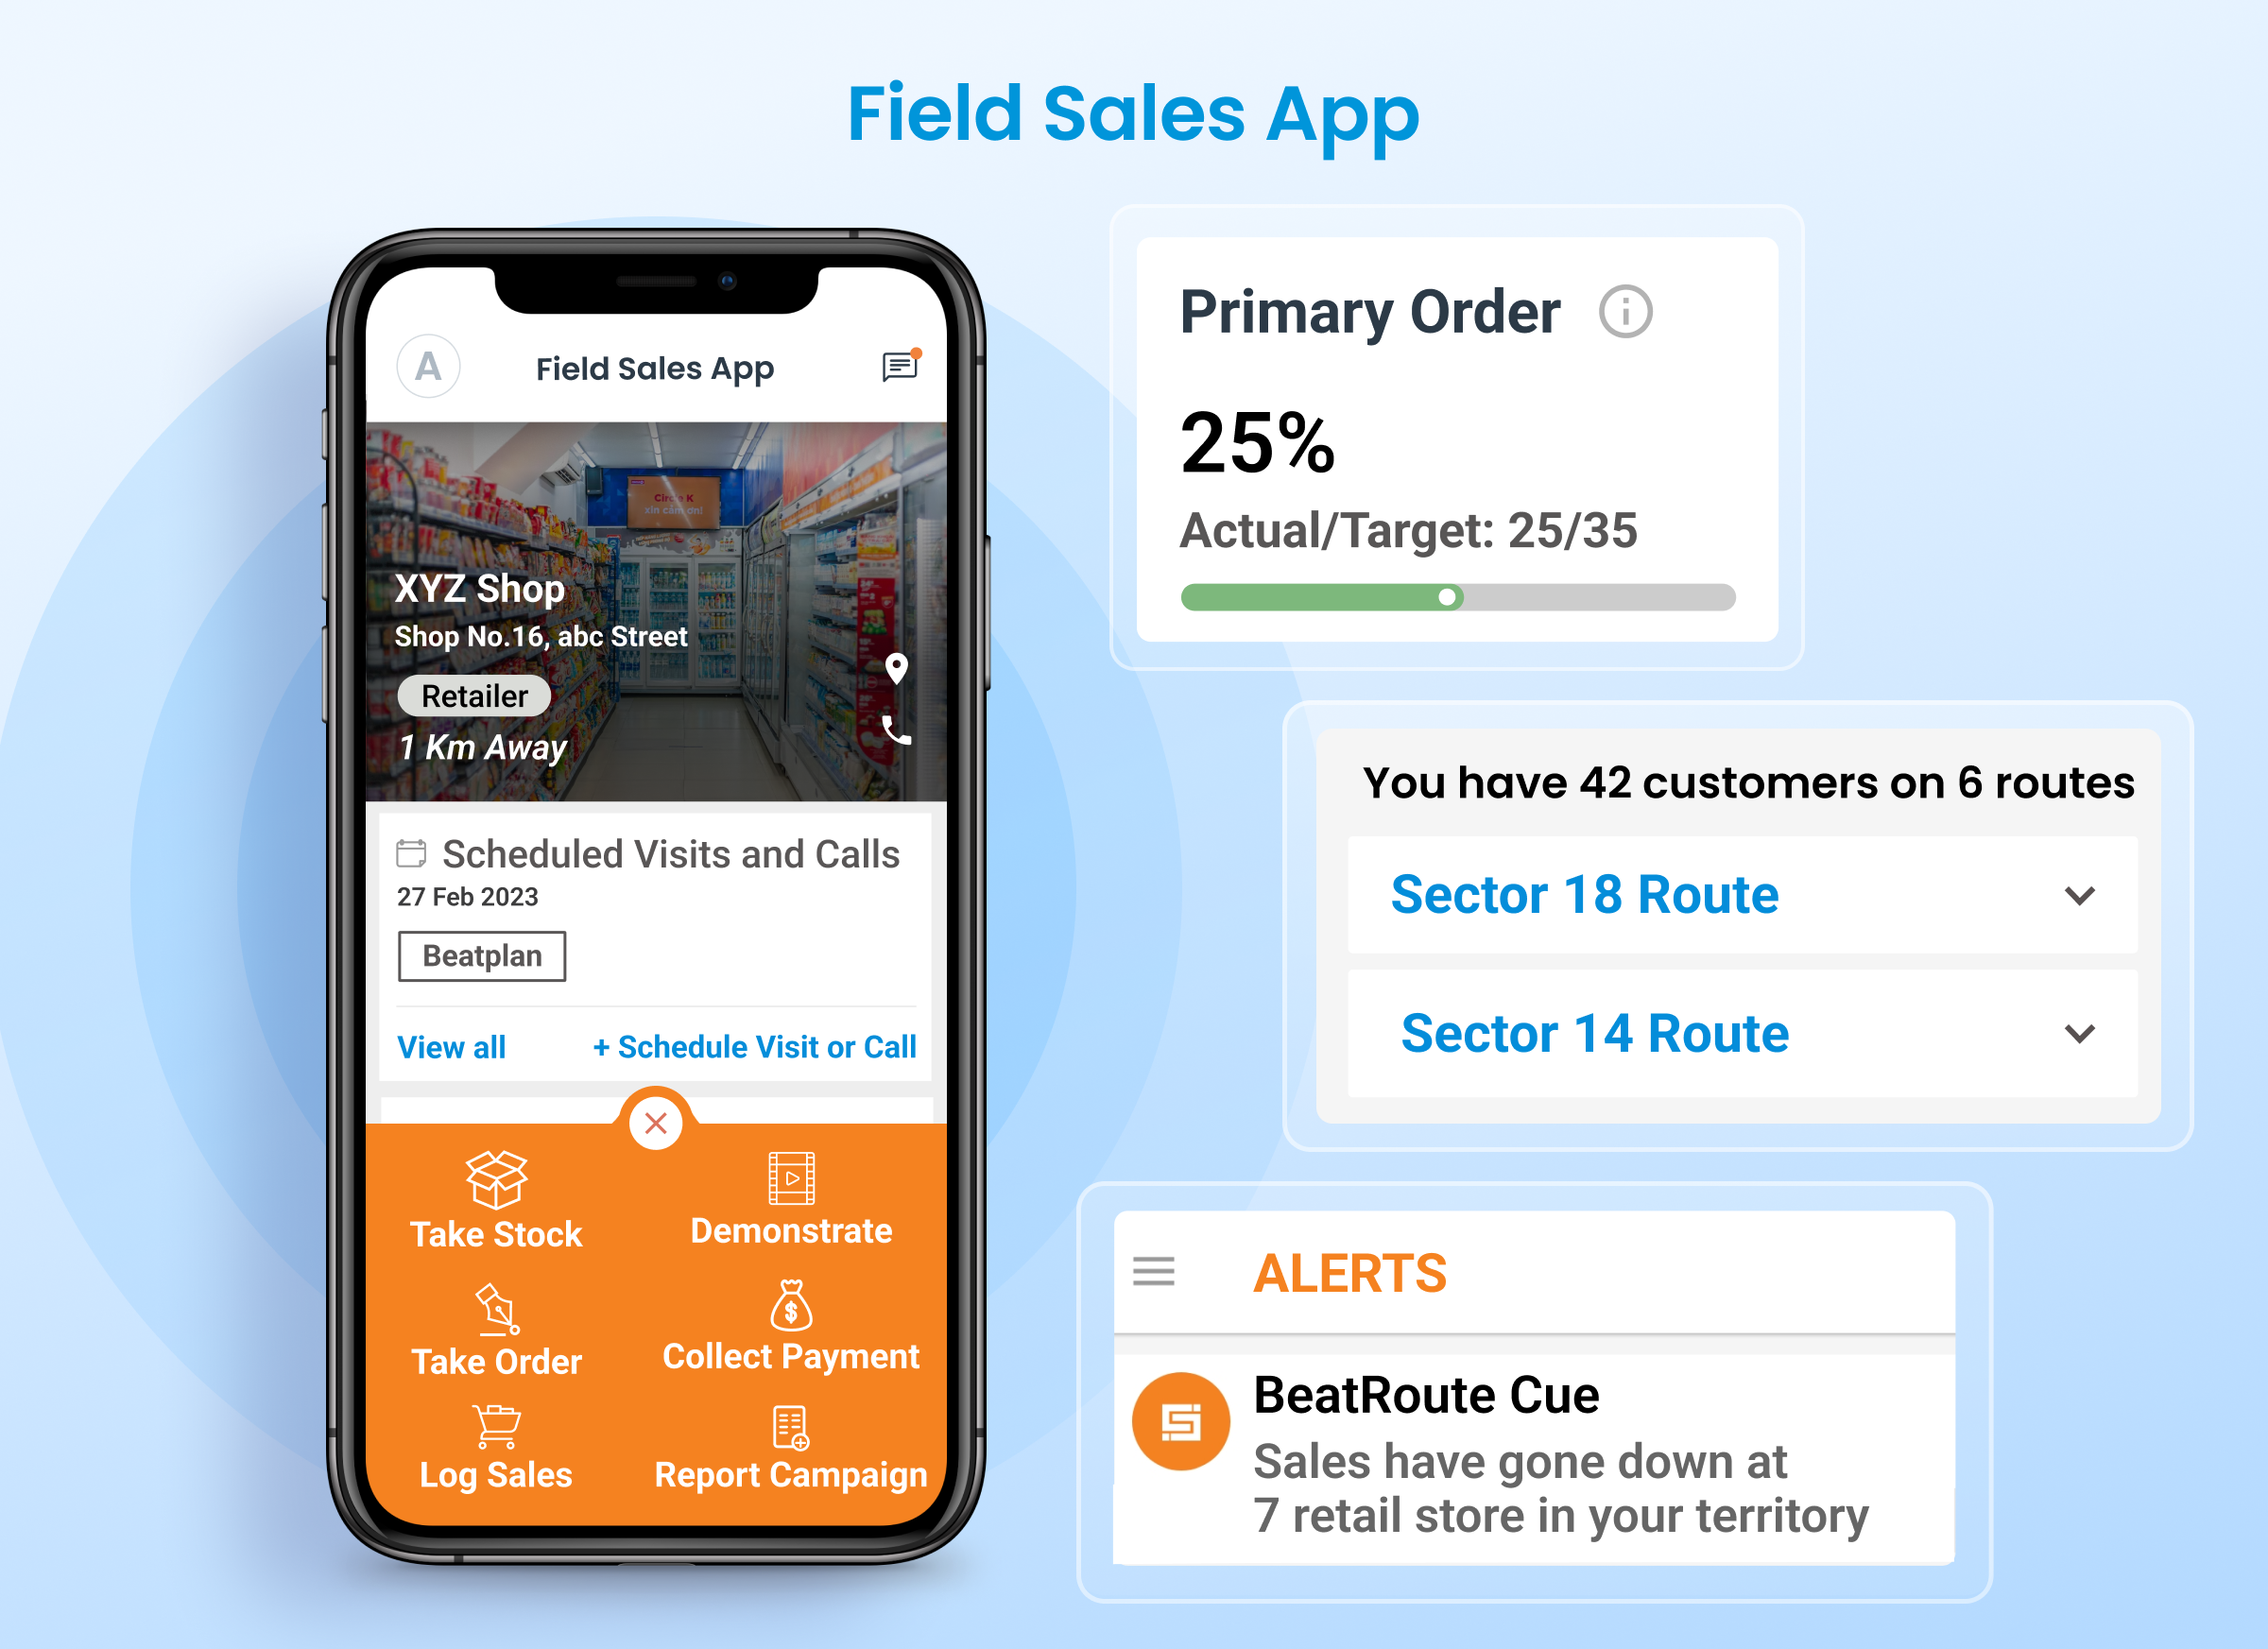 Our field sales app enables sales reps to take orders, optimise beat plans, and be informed on store sales performance.